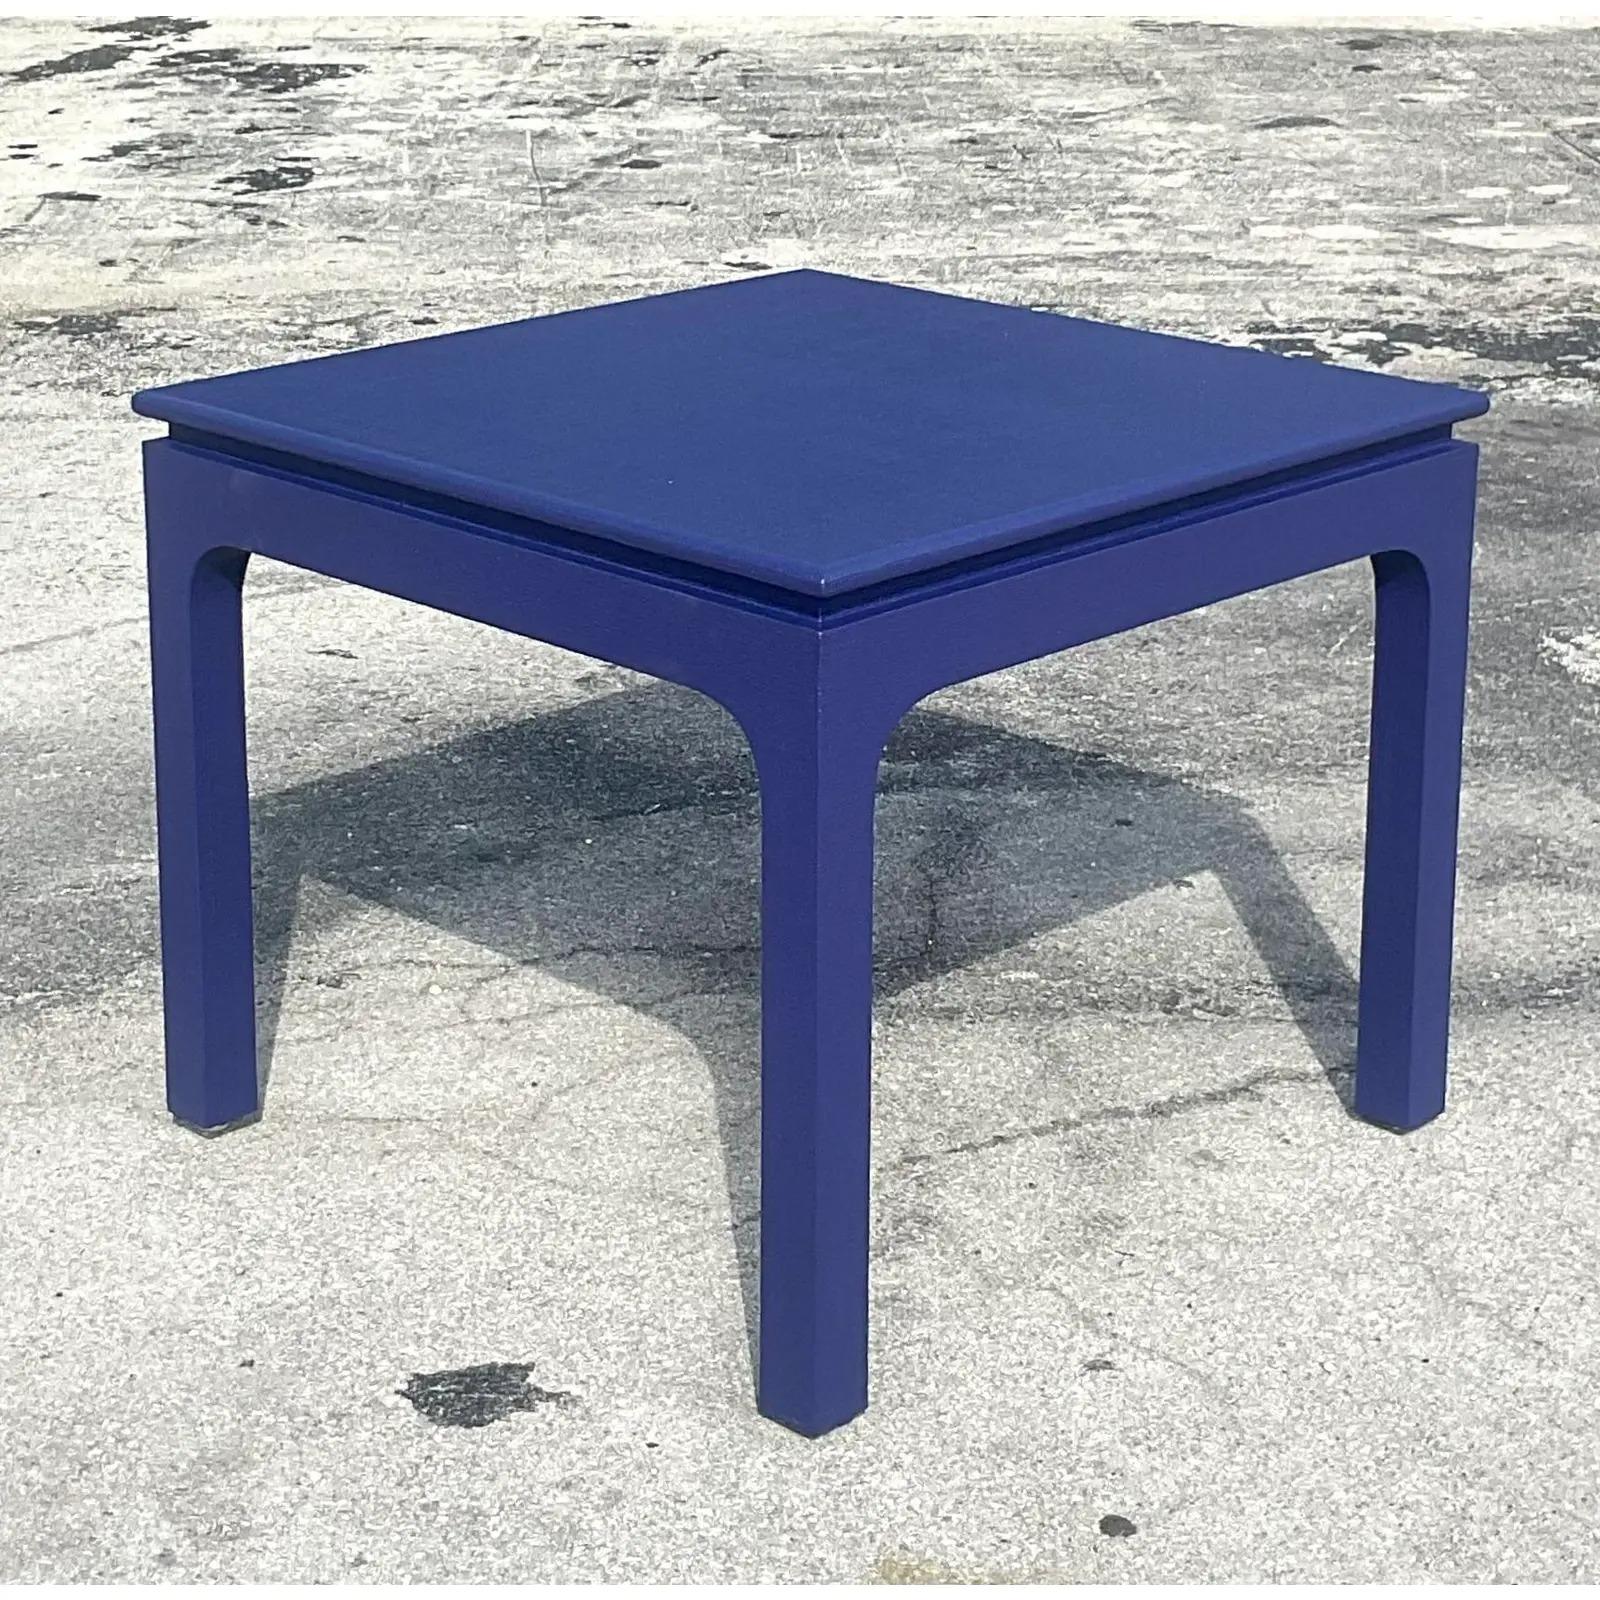 Incredible vintage Regency game table. Made by the iconic Harrison Van Horn. A beautiful Grasscloth finish in a deep blue/purple shade. Easily changed to any color you may need. You decide! Tagged on the bottom with makers mark. Acquired from a Palm